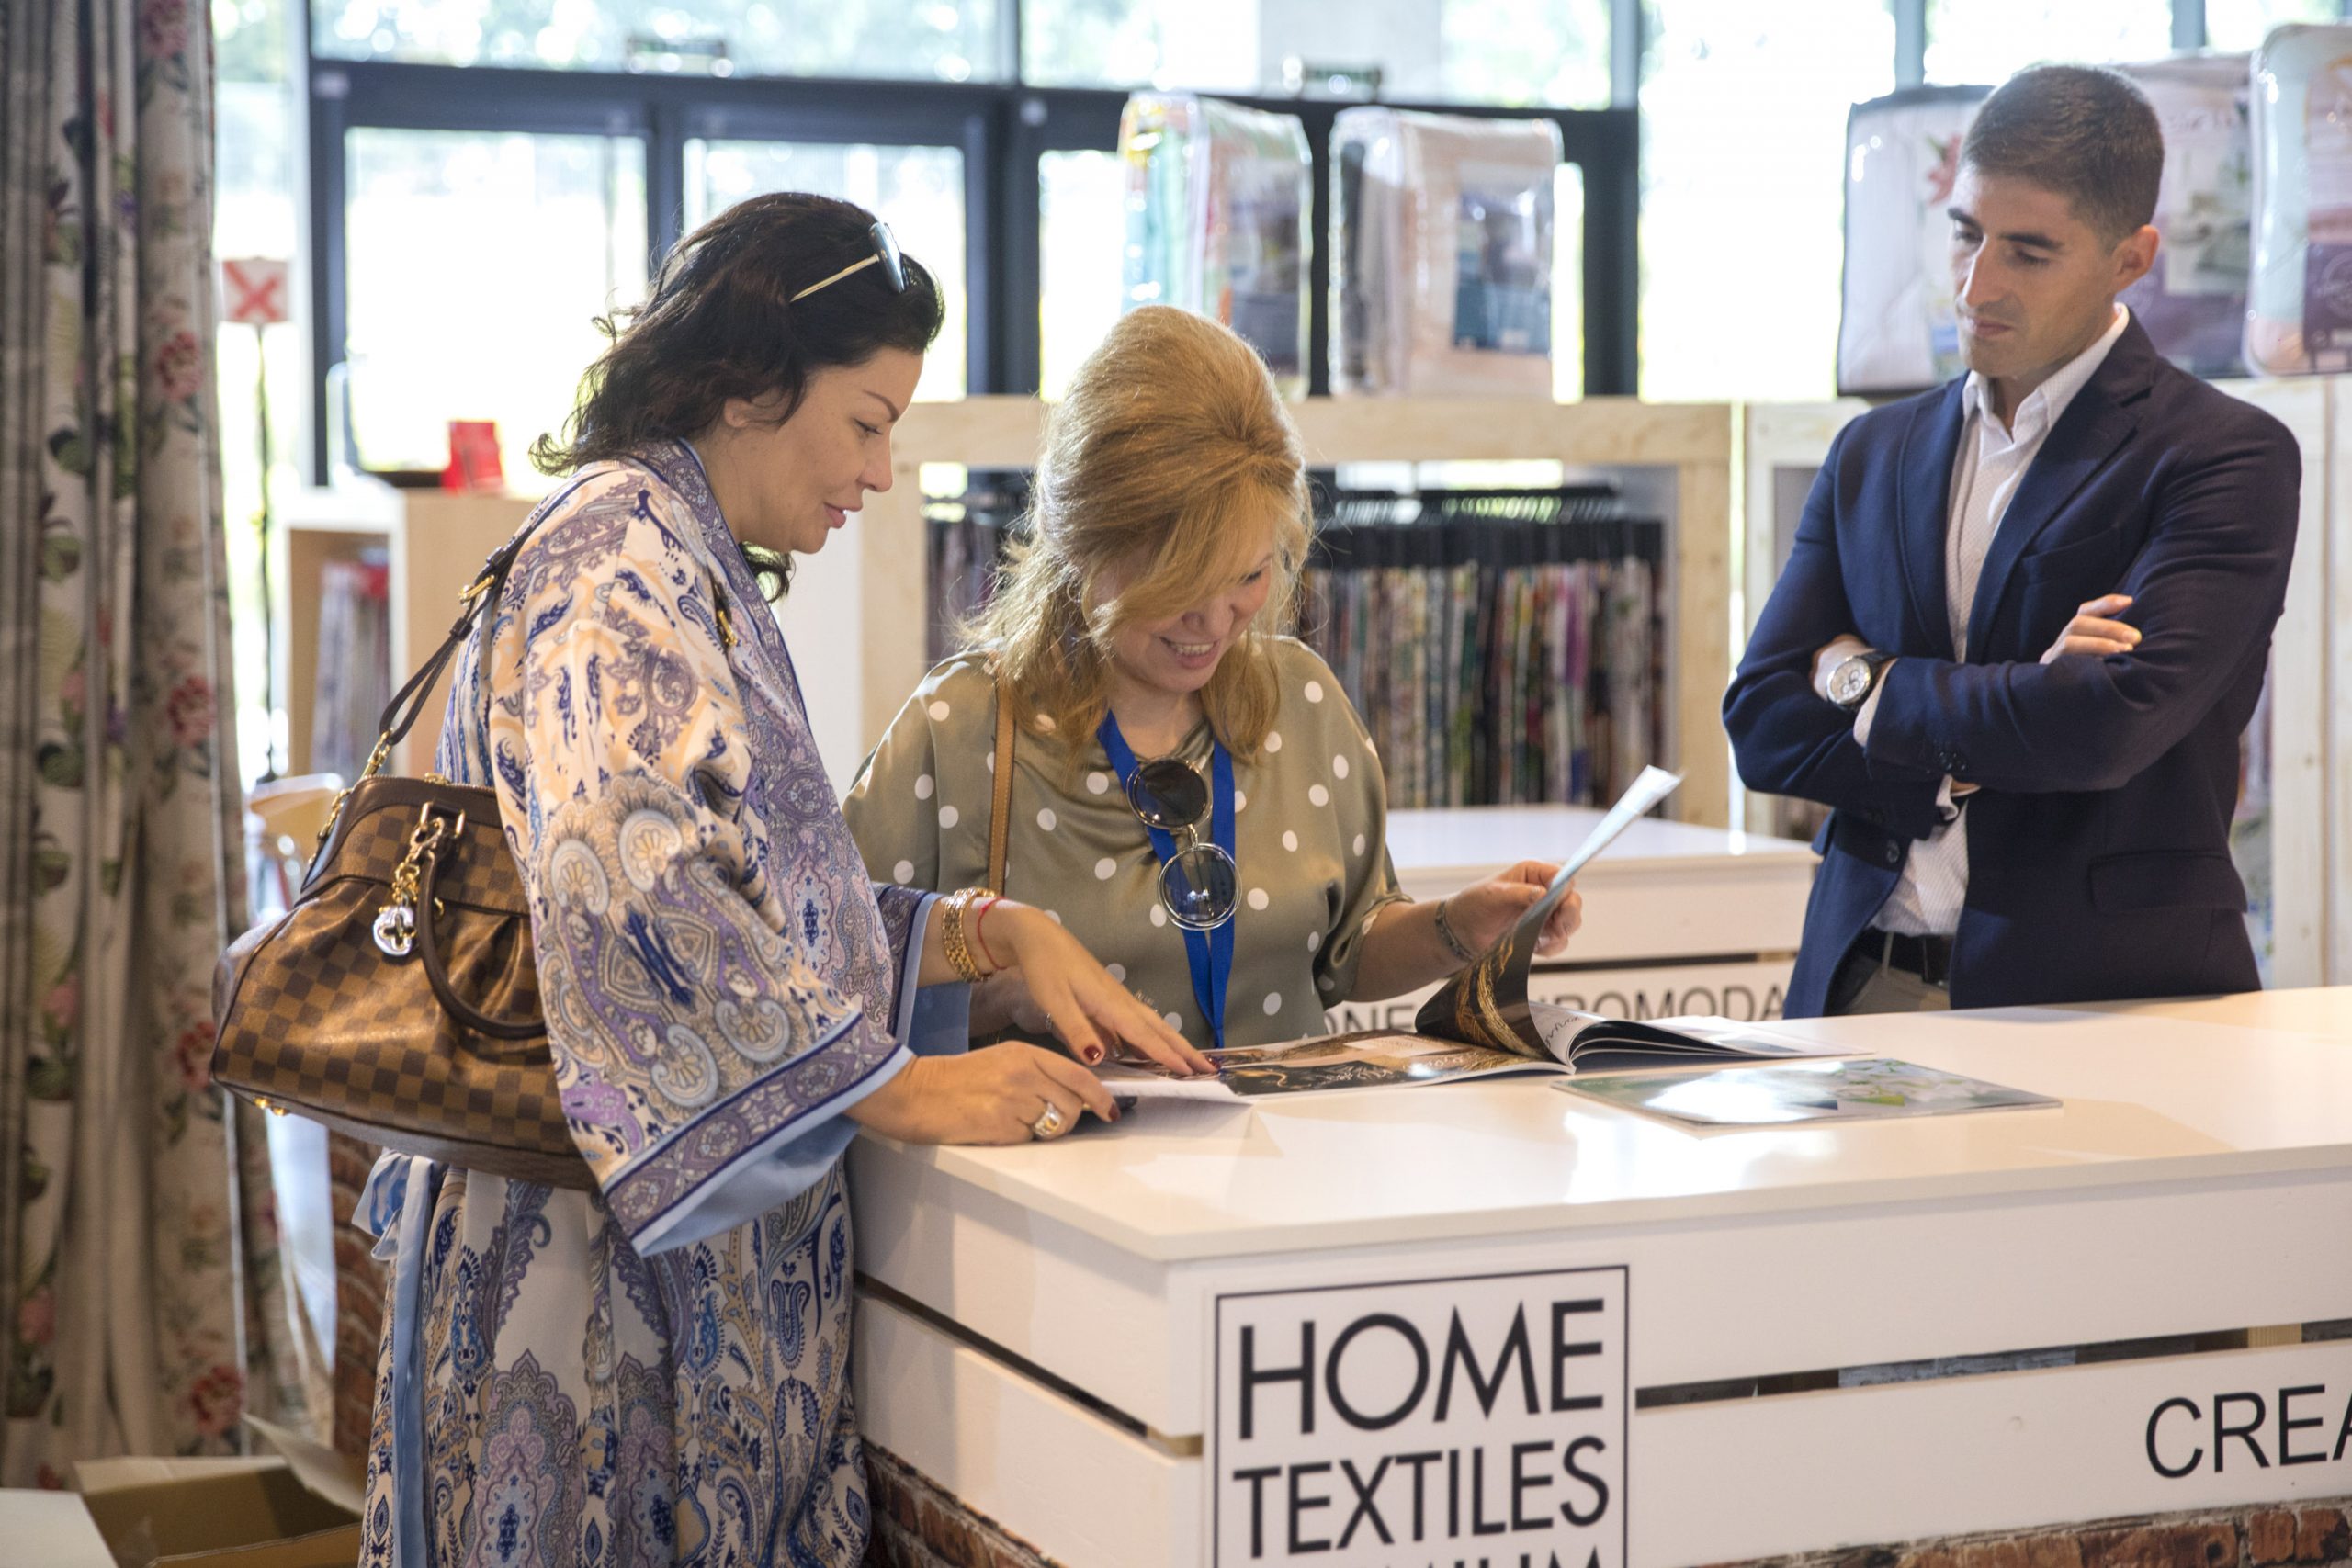 You are currently viewing Textile industry returns to Valencia with 30% more exhibits at Home Textiles Premium by Textilhogar